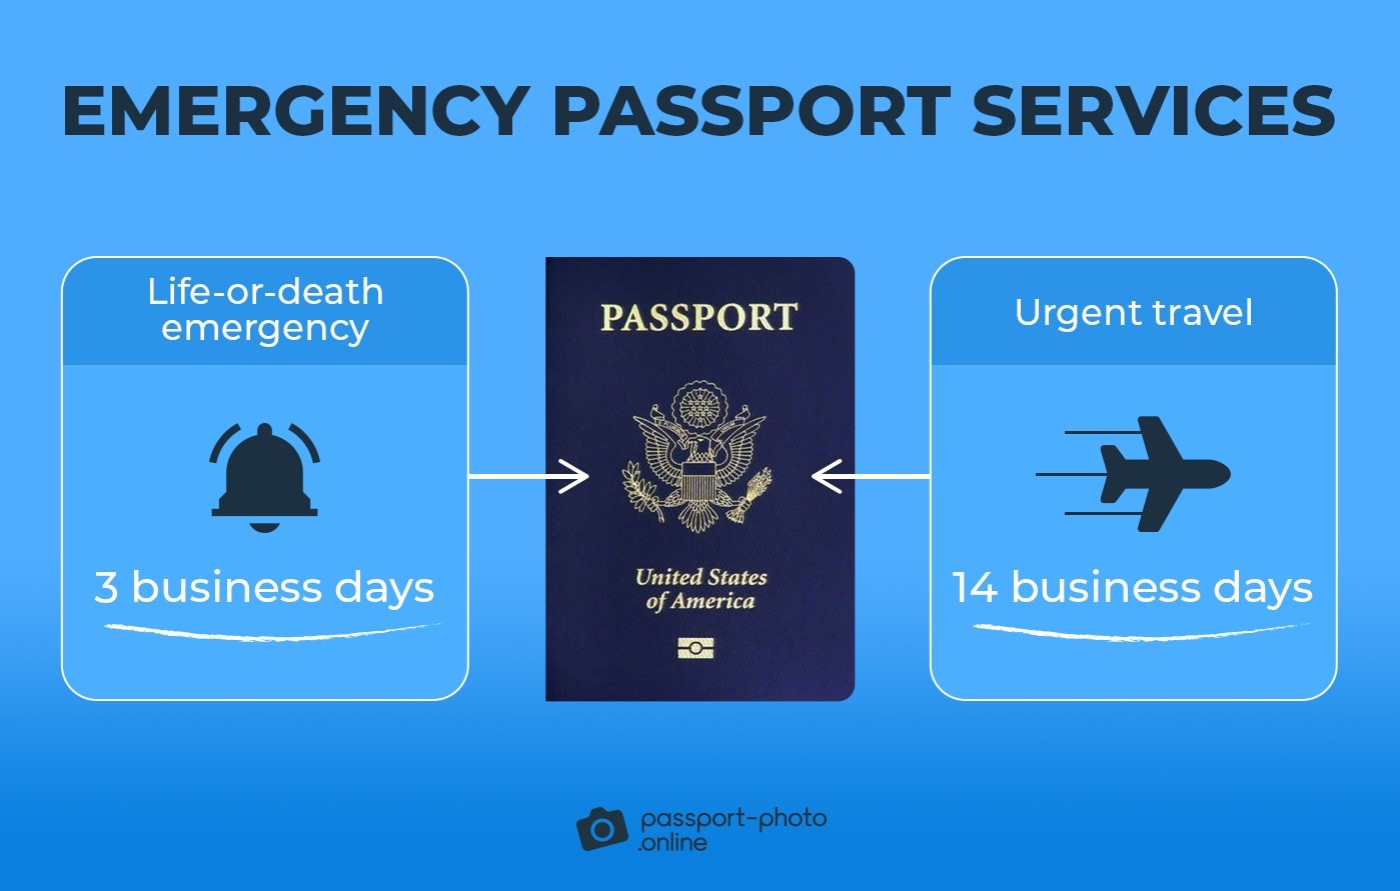 Estimated processing time of life-or-death emergency and urgent U.S. passports